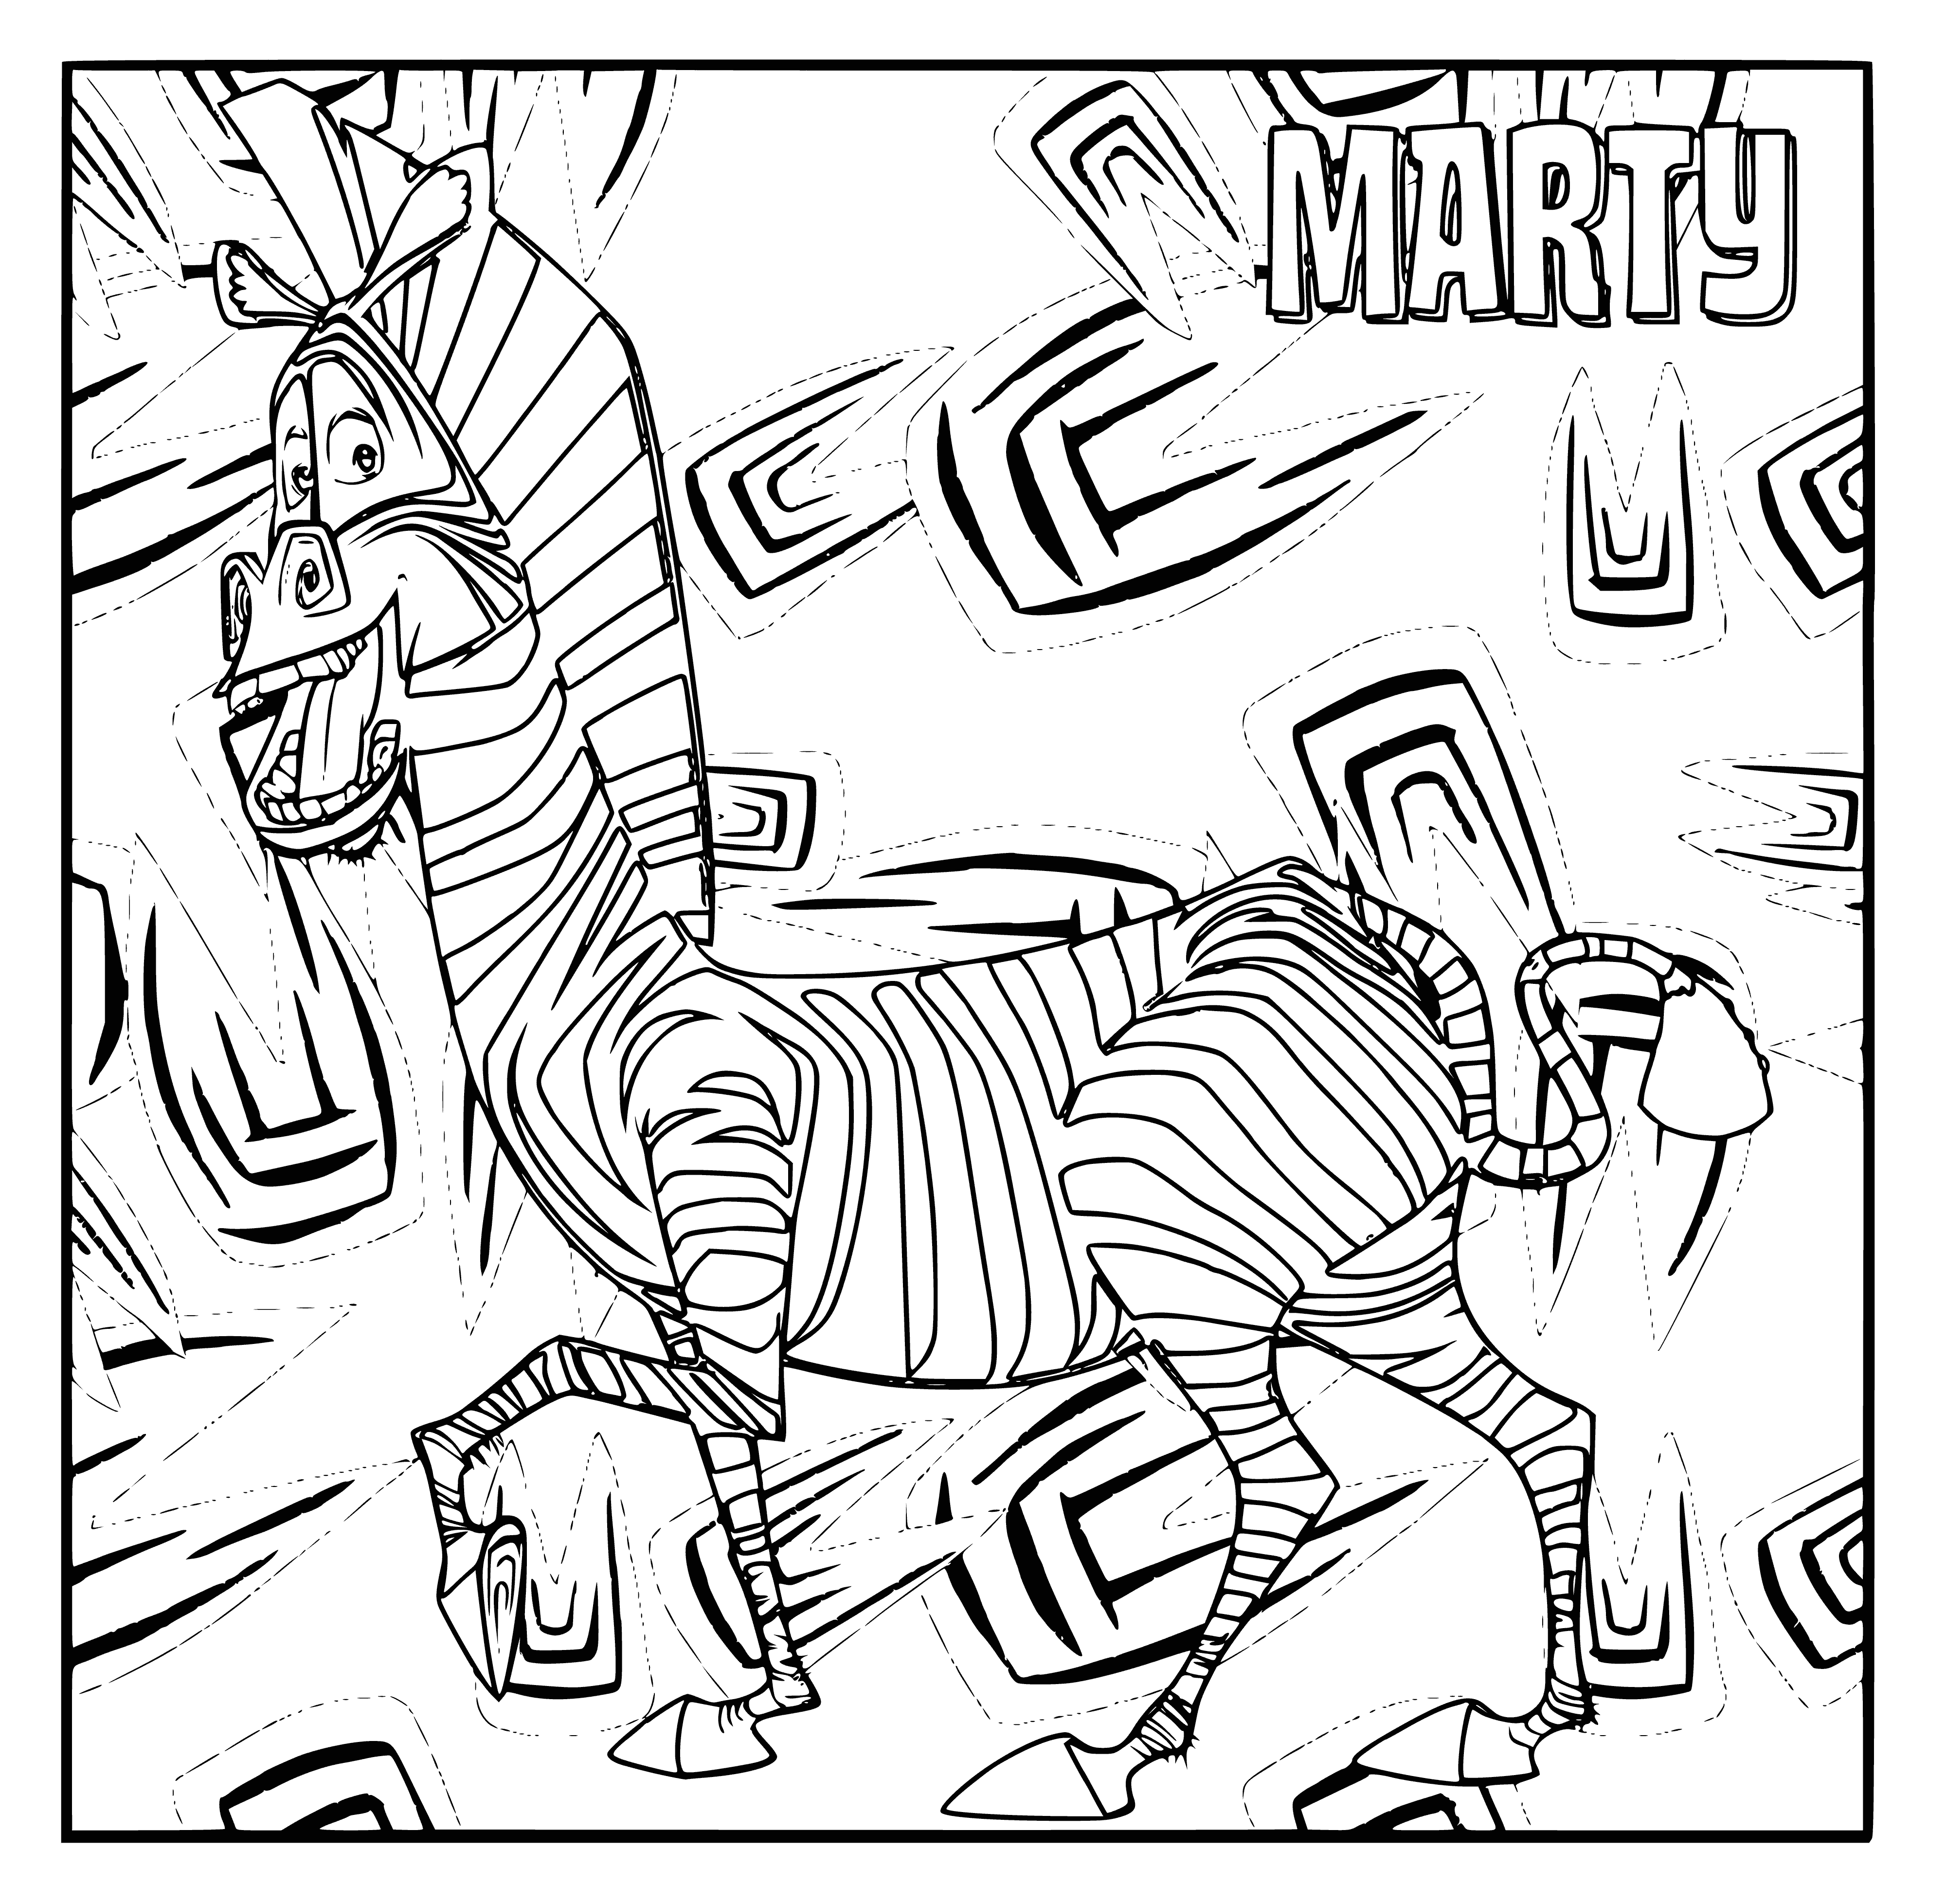 Zebra Marty coloring page